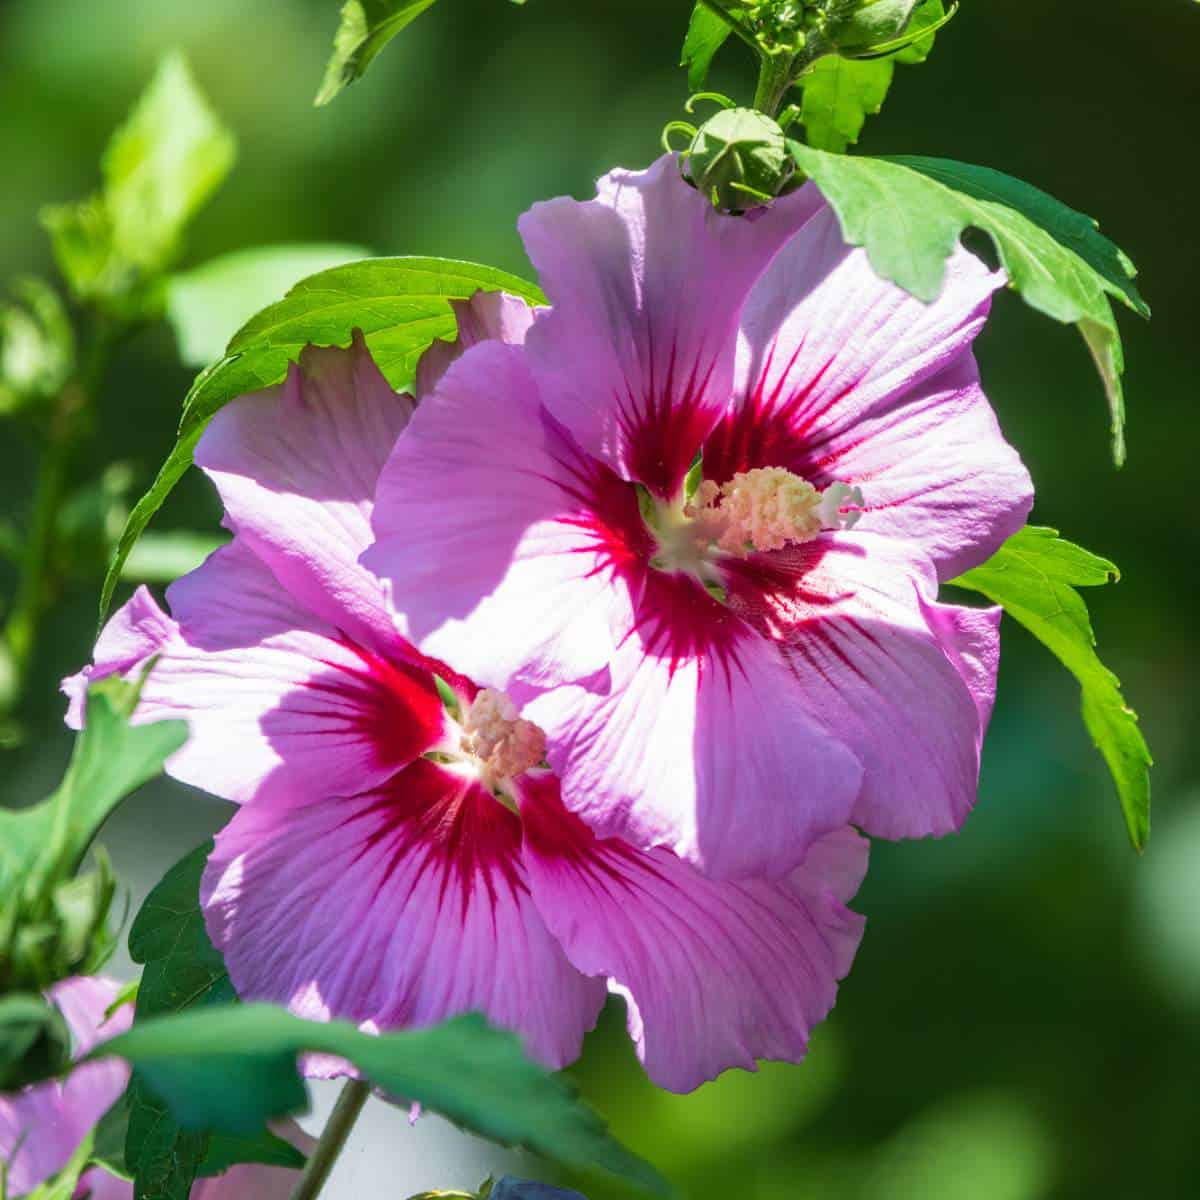 Explore the various types of hibiscus flowers, with their vibrant colors and intricate petal formations. From the showy Hibiscus rosa-sinensis to the delicate Hibiscus